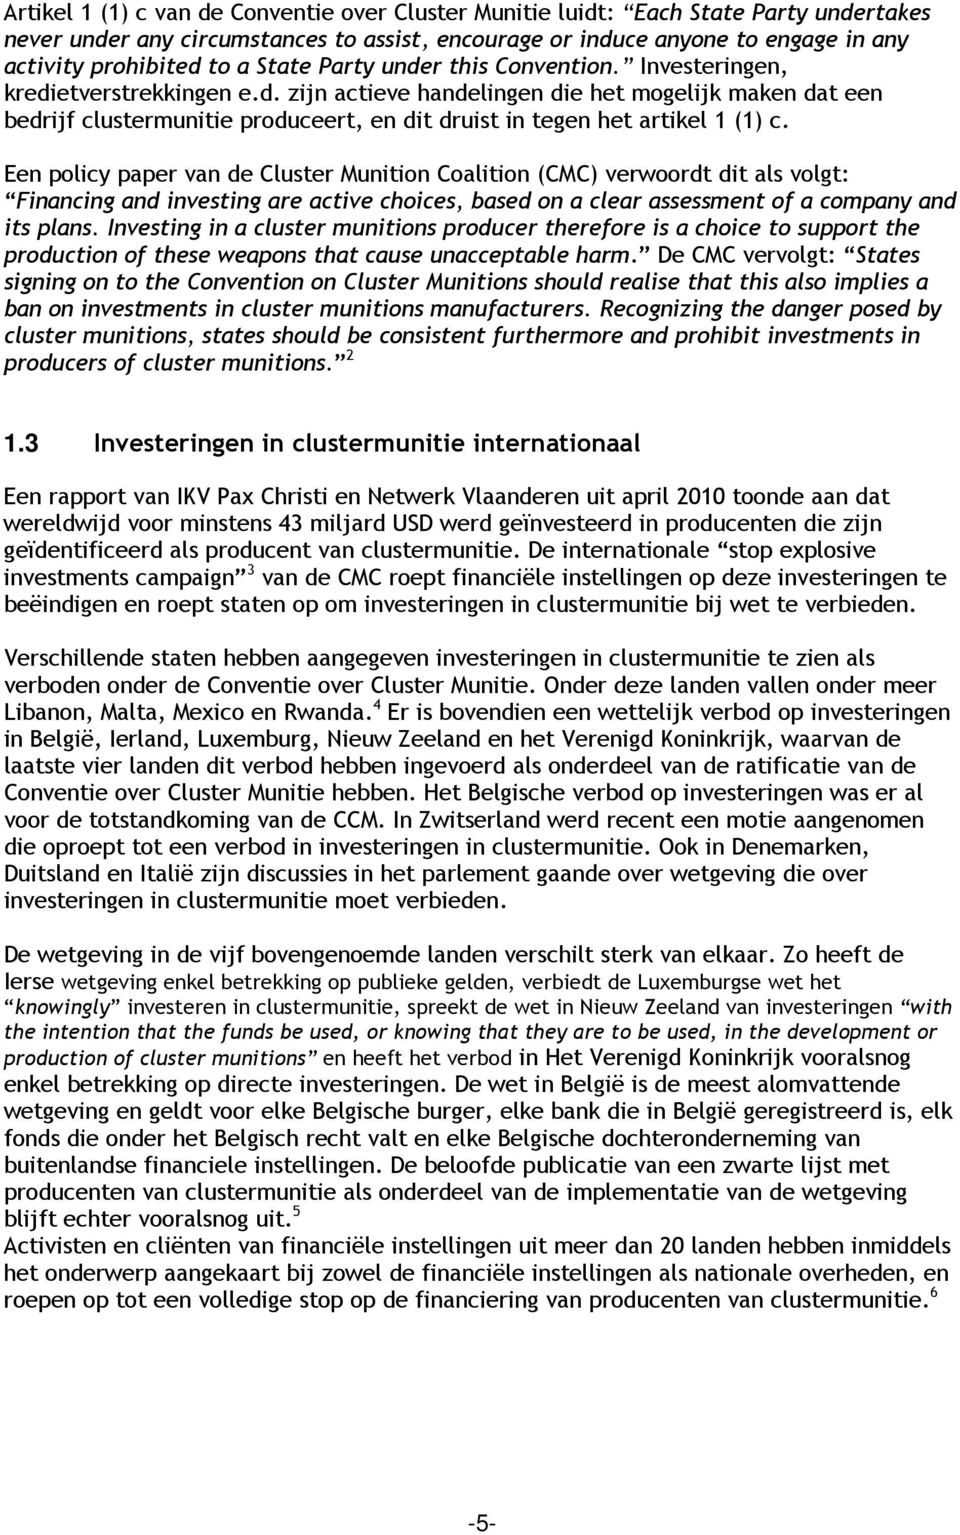 Een policy paper van de Cluster Munition Coalition (CMC) verwoordt dit als volgt: Financing and investing are active choices, based on a clear assessment of a company and its plans.